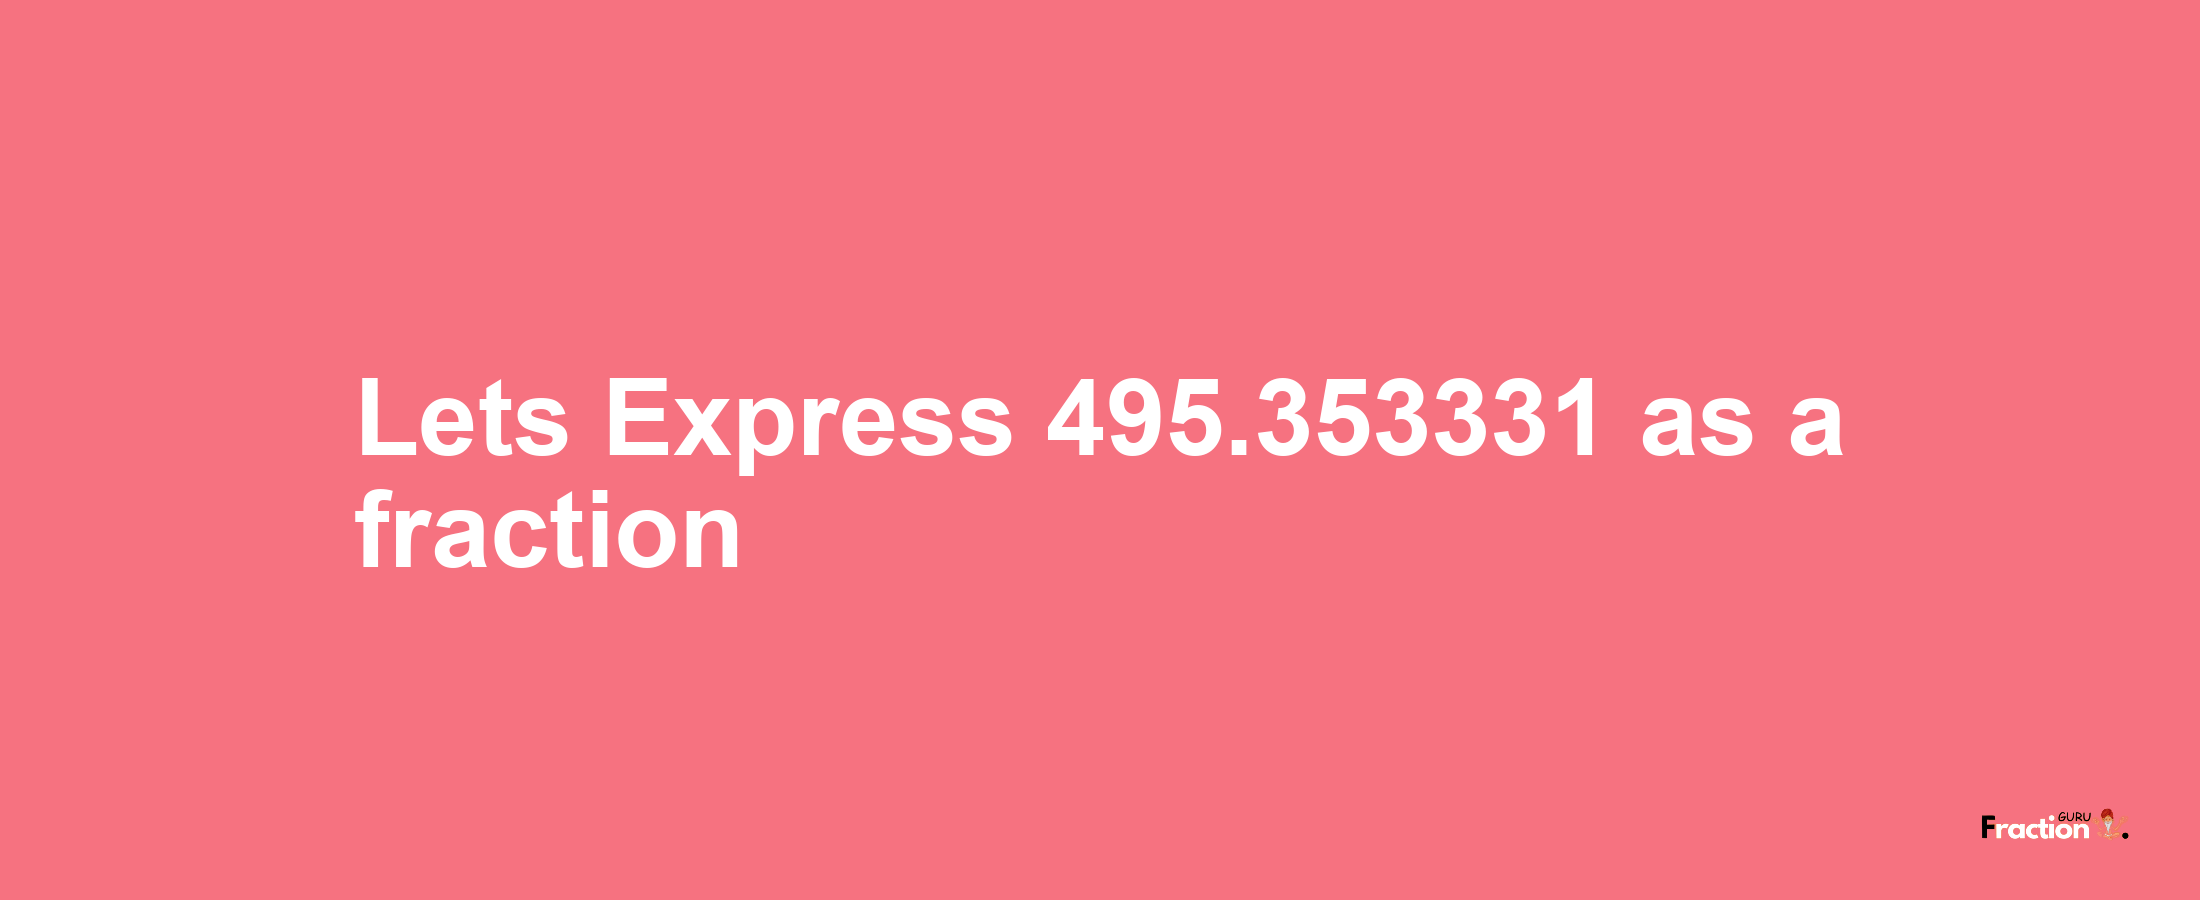 Lets Express 495.353331 as afraction